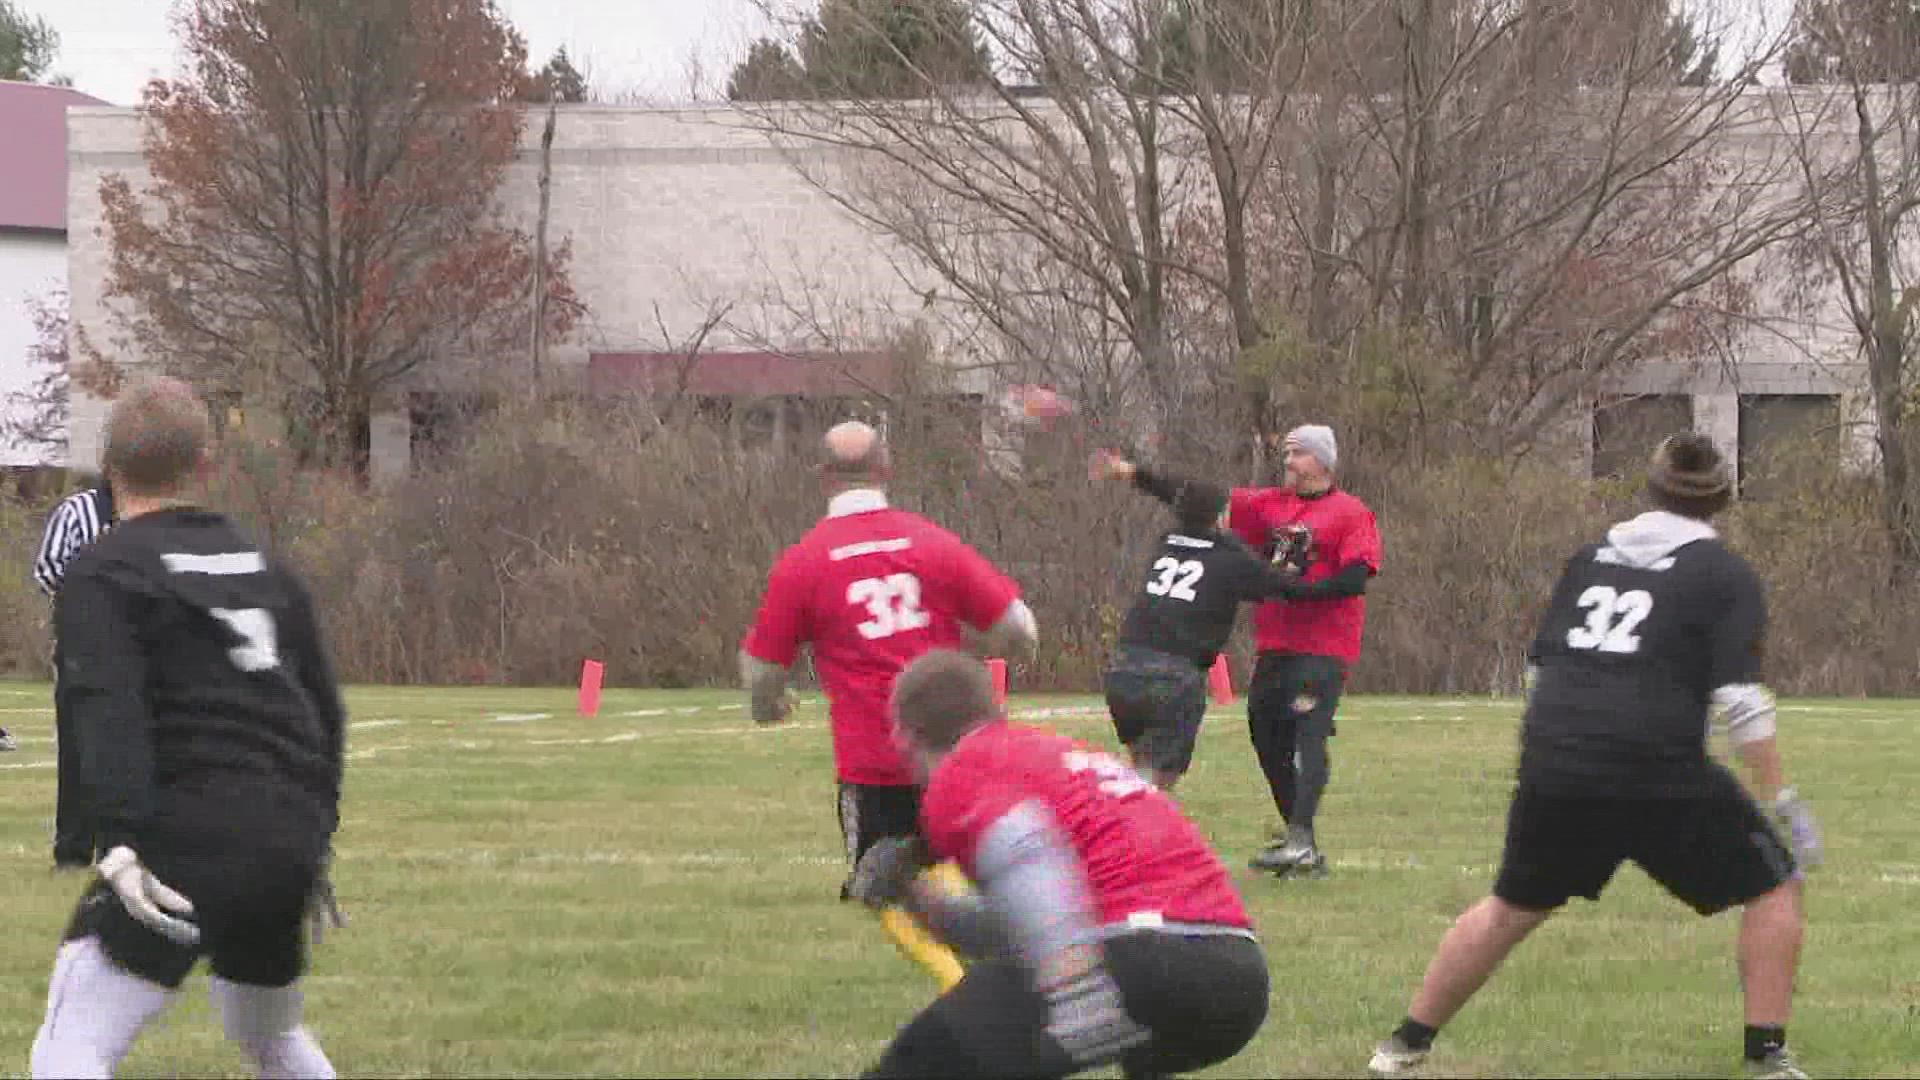 Meadows Turkey Bowl and Turkey Trot continue in Northeast Ohio